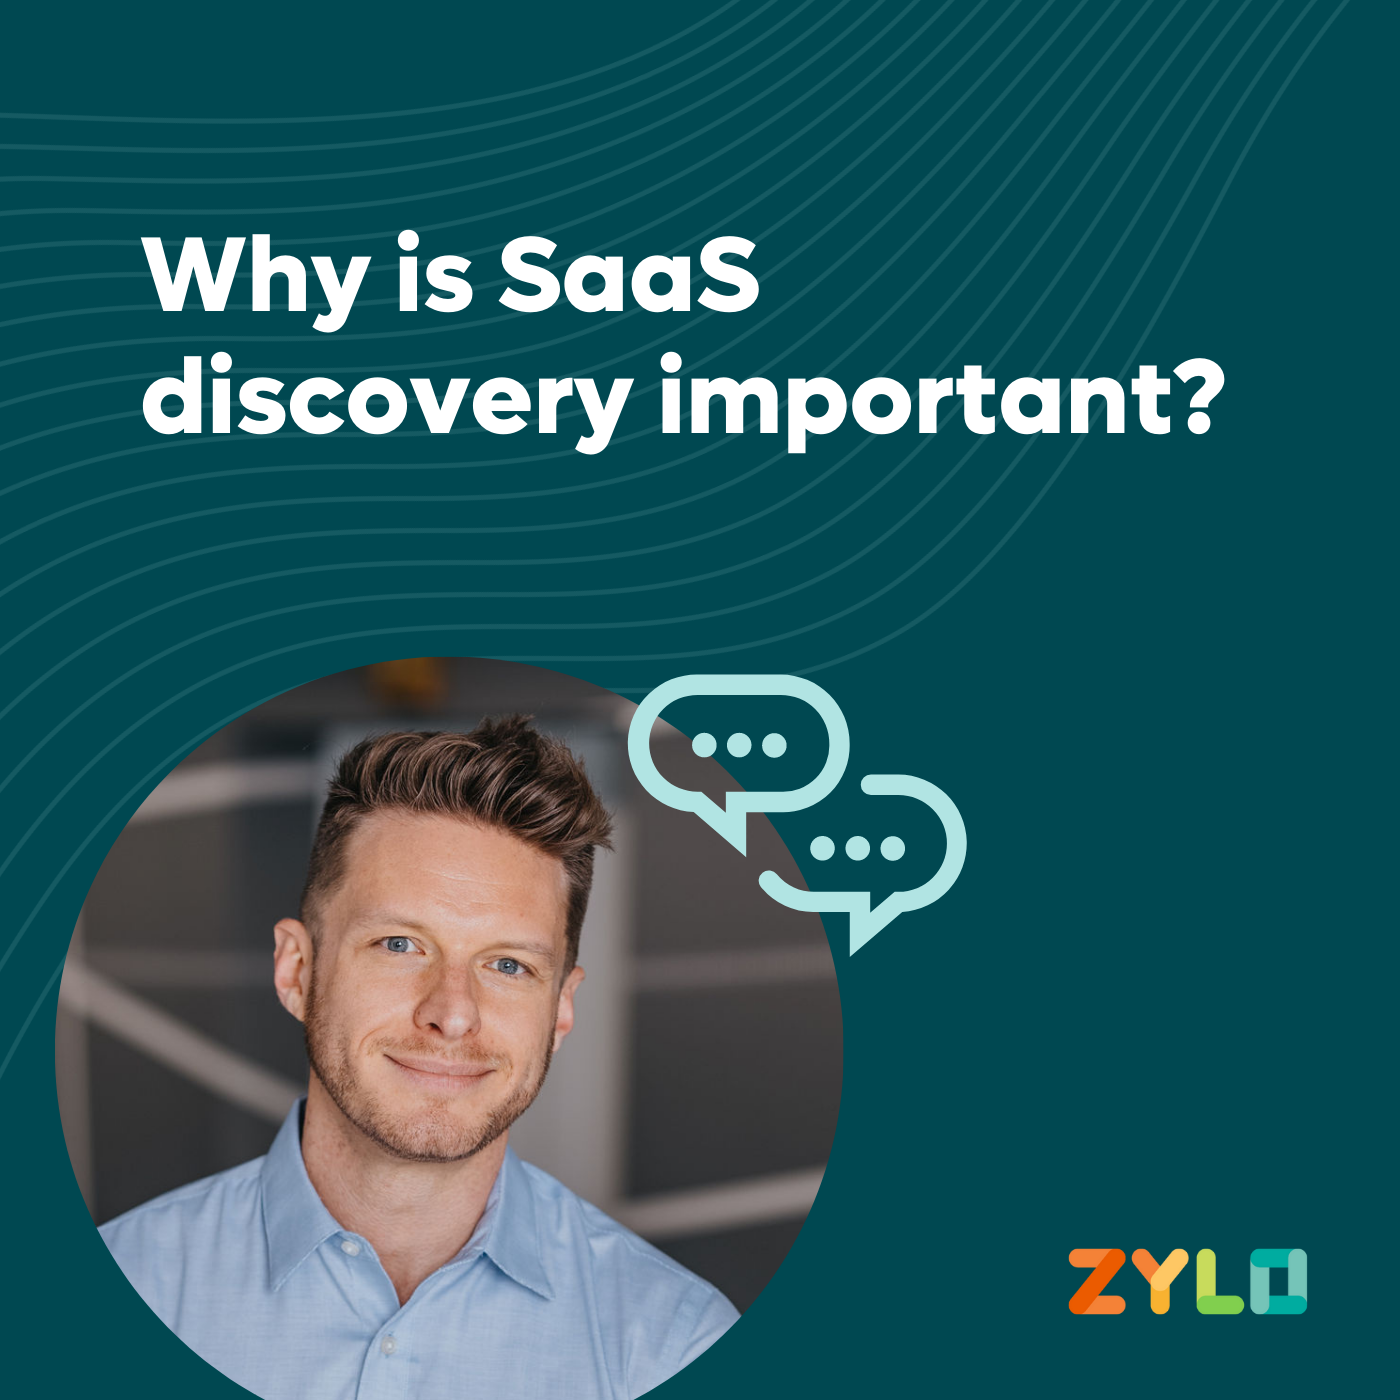 Why is SaaS discovery important?